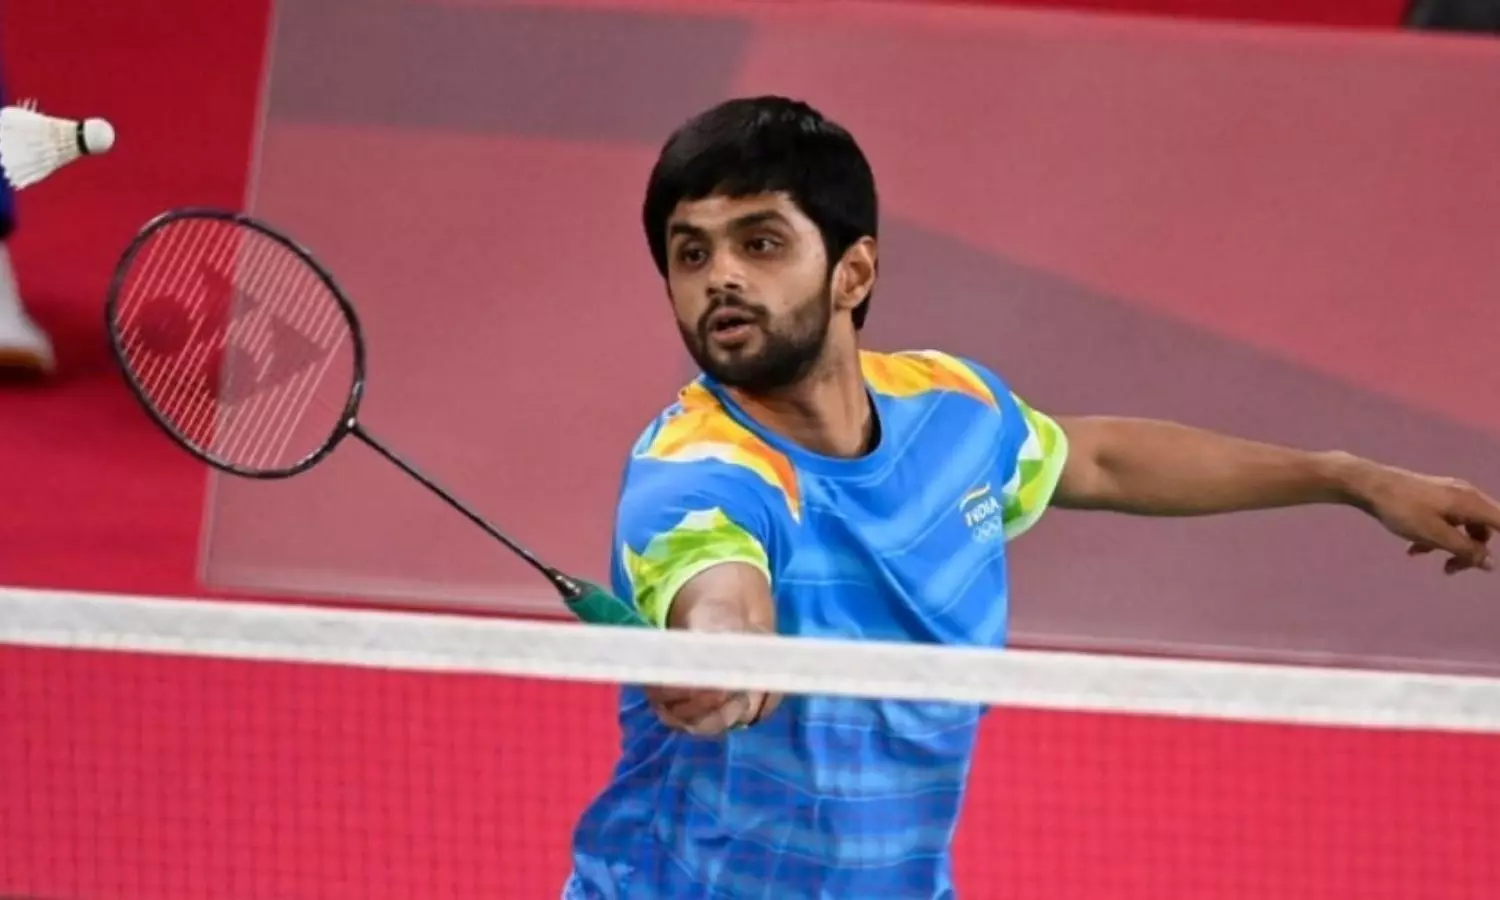 Sai Praneeth's dream ends before it starts at the Tokyo Olympics